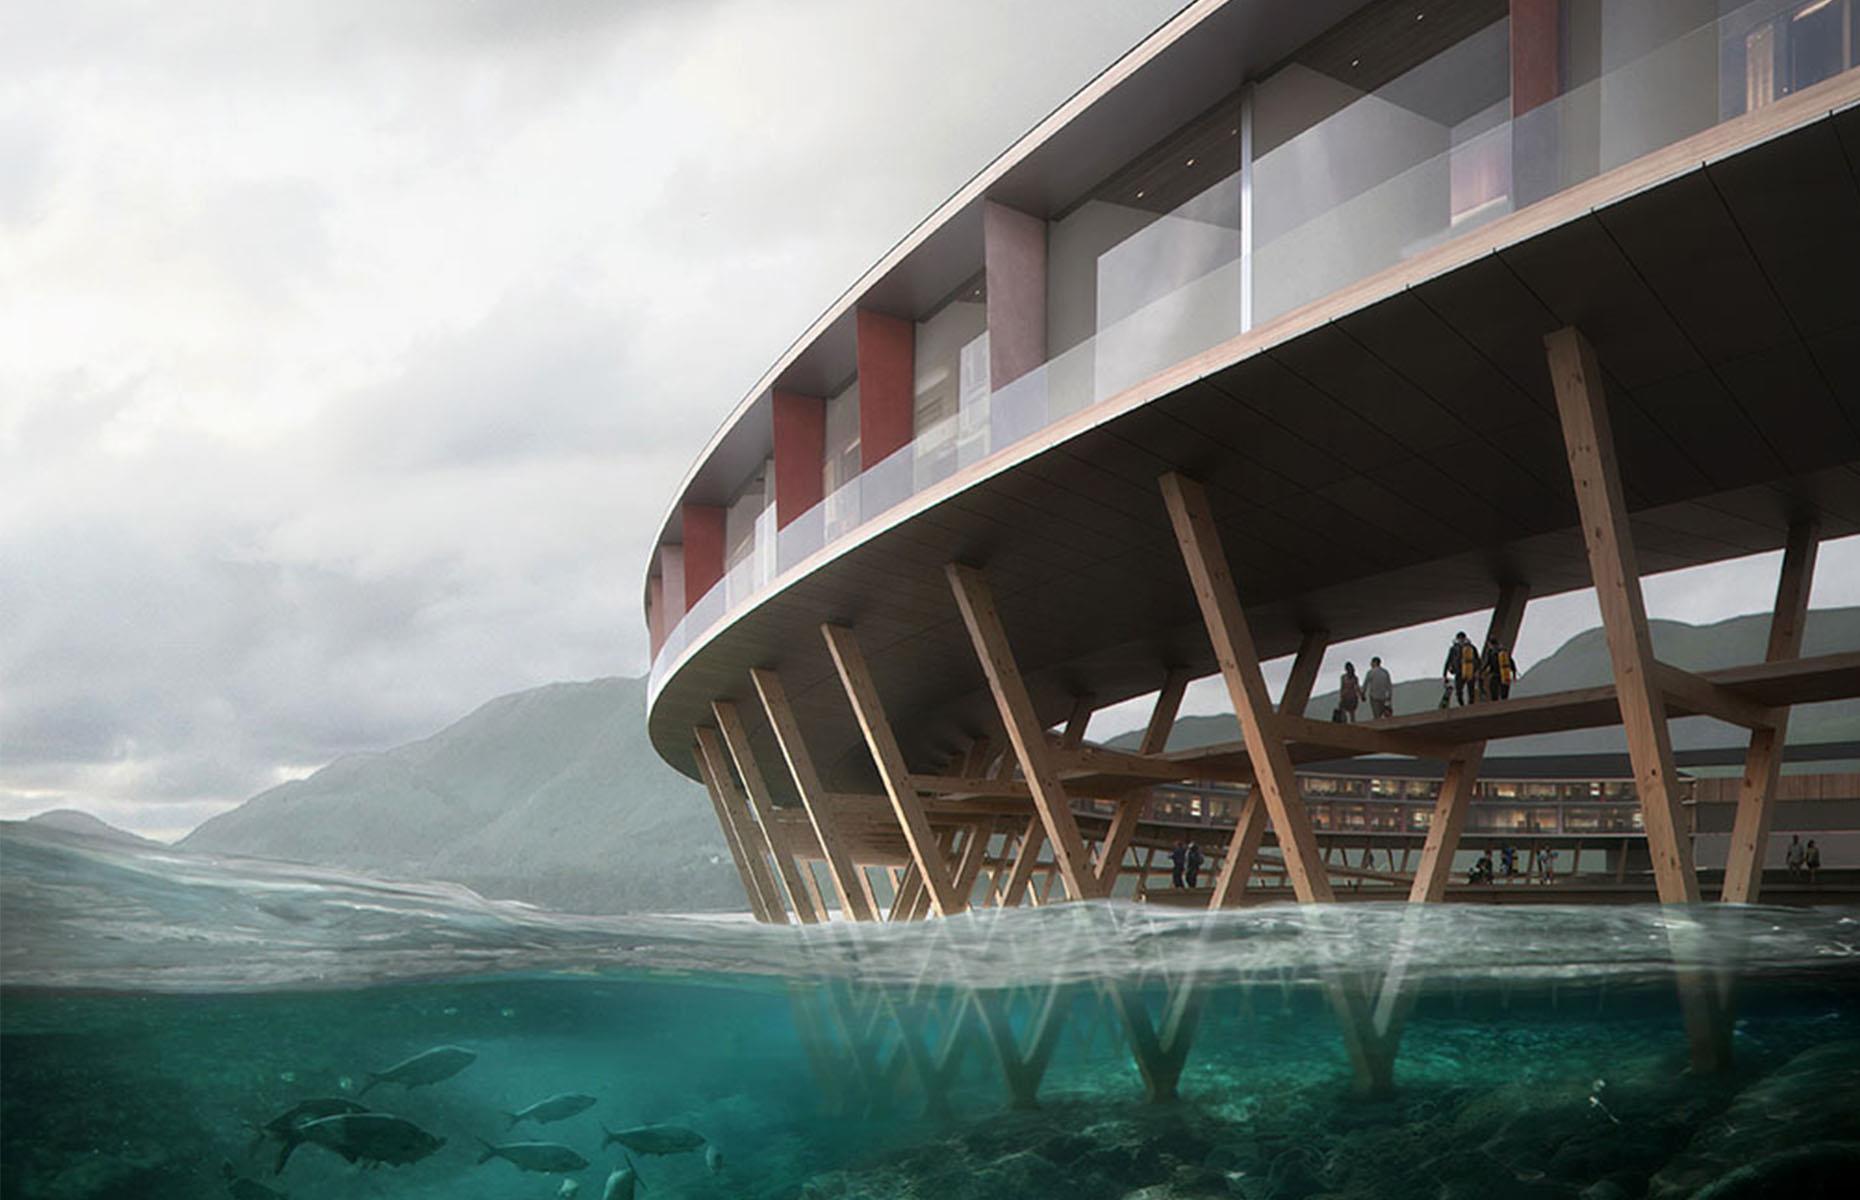 The hotel’s design has nature at its heart. It was inspired by local architectural traditions like “rorbuer” – stilted cabins used seasonally by fishermen – and it juts out into the Holandsfjorden fjord, supported by weather-resistant wooden poles. It’ll be reached by an energy-neutral boat, that’ll shuttle guests to the hotel from the remote town of Bodø.